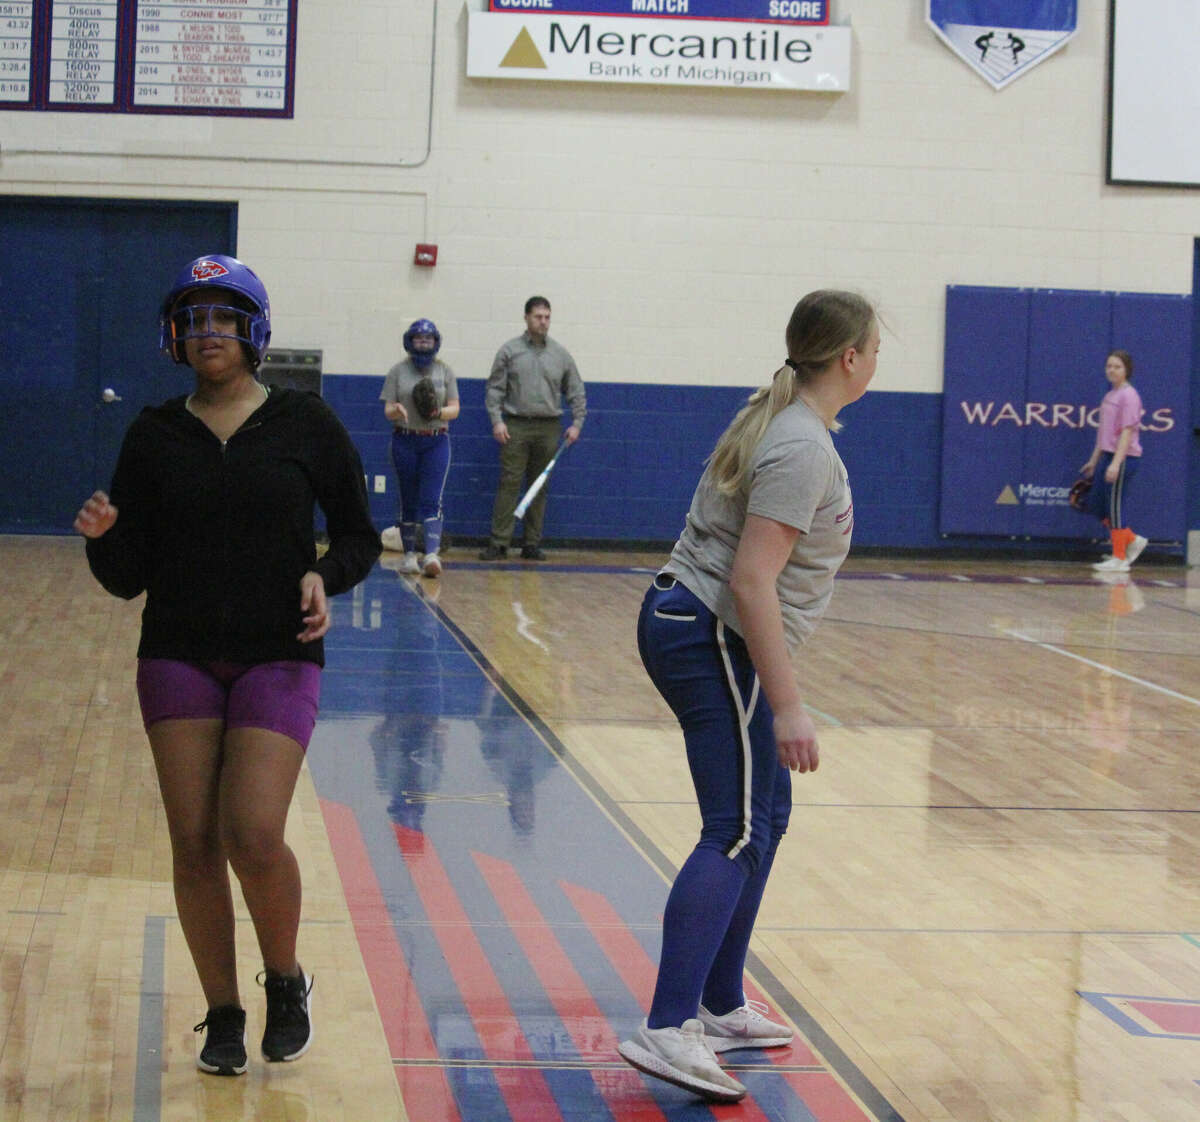 Chippewa Hills softball players work out during a practice in the high school gym last week.